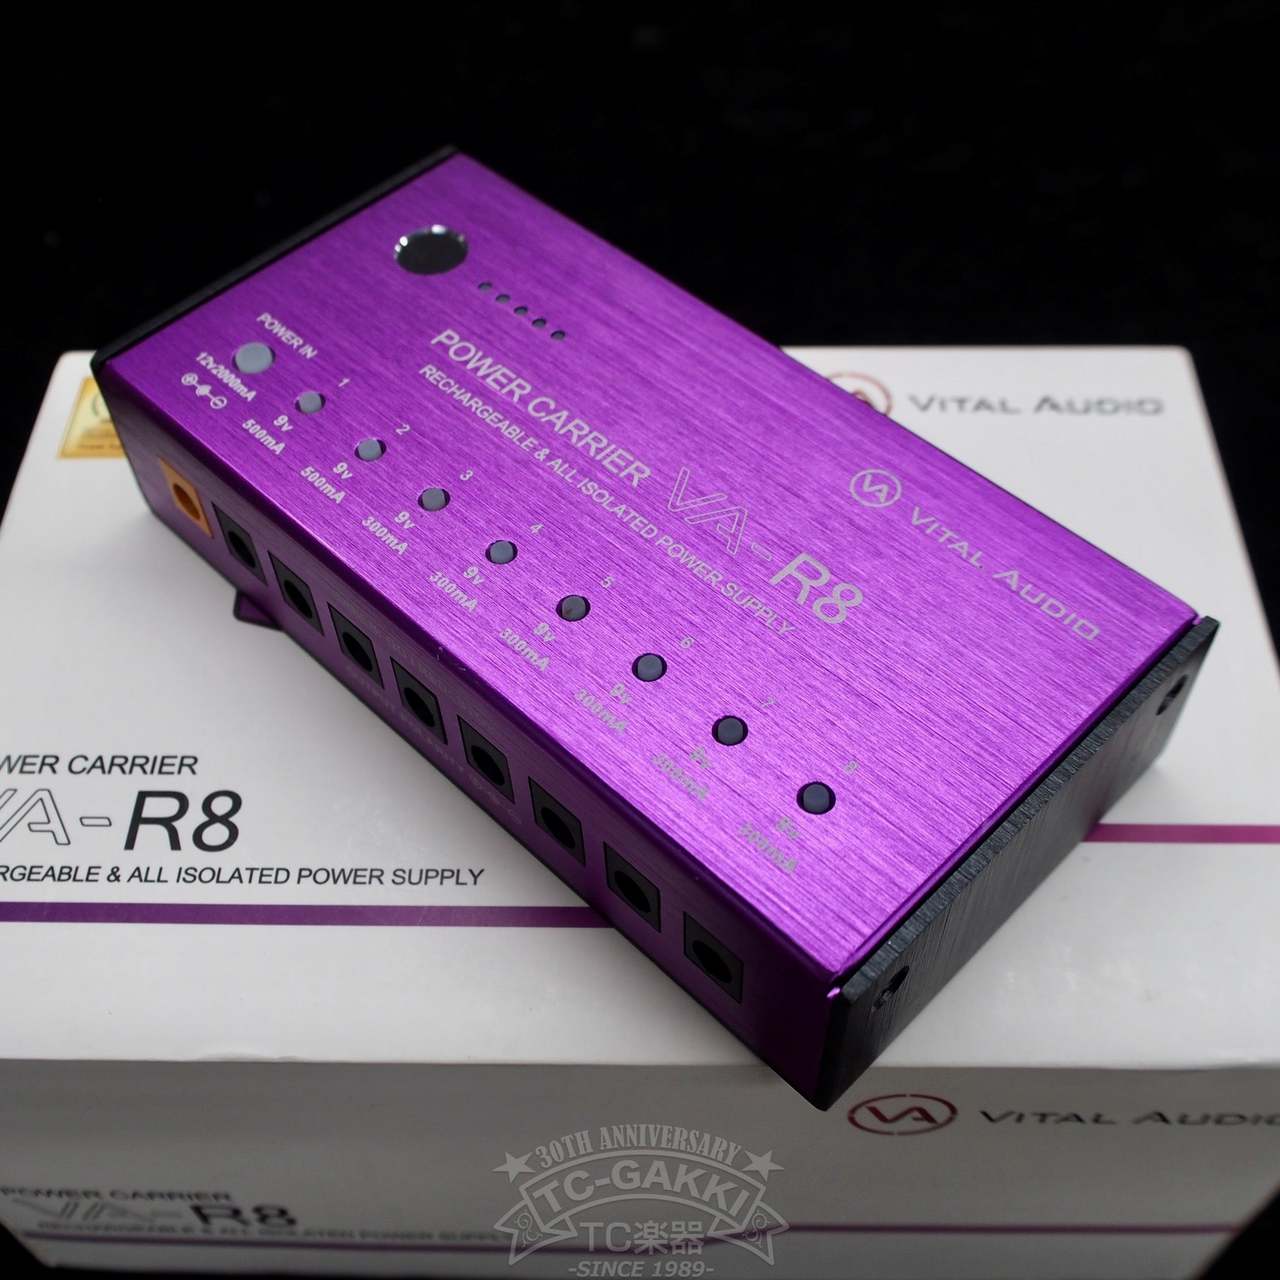 Vital Audio VA-R8 RECHARGEABLE & ALL ISOLATED POWER SUPPLY（中古 